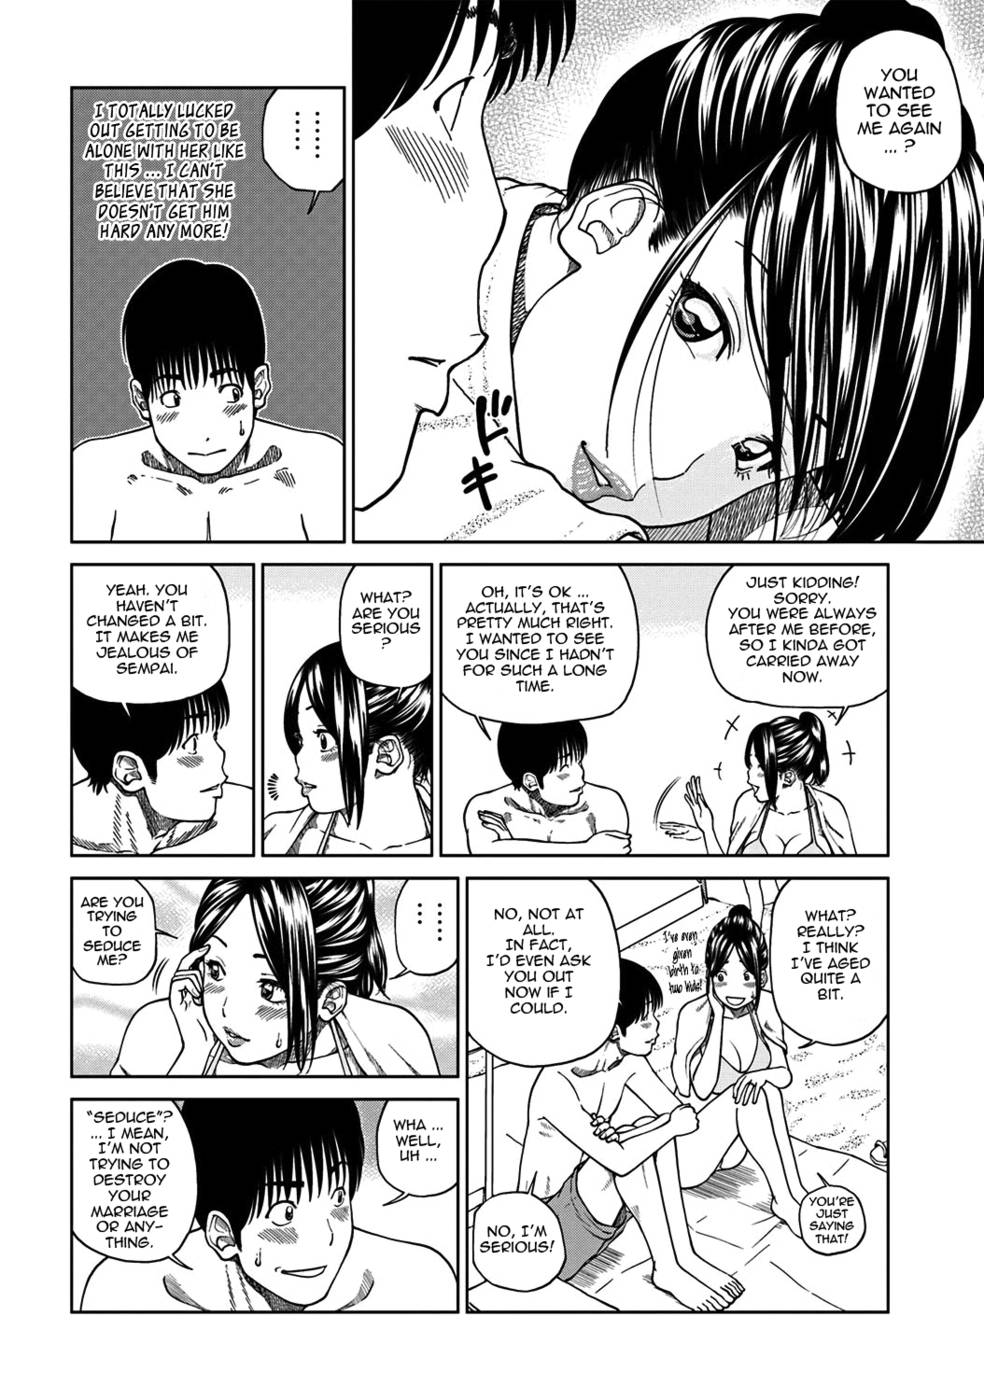 Hentai Manga Comic-33 Year Old Unsatisfied Wife-Chapter 7-The Married Woman Who Became A Sex Friend-4